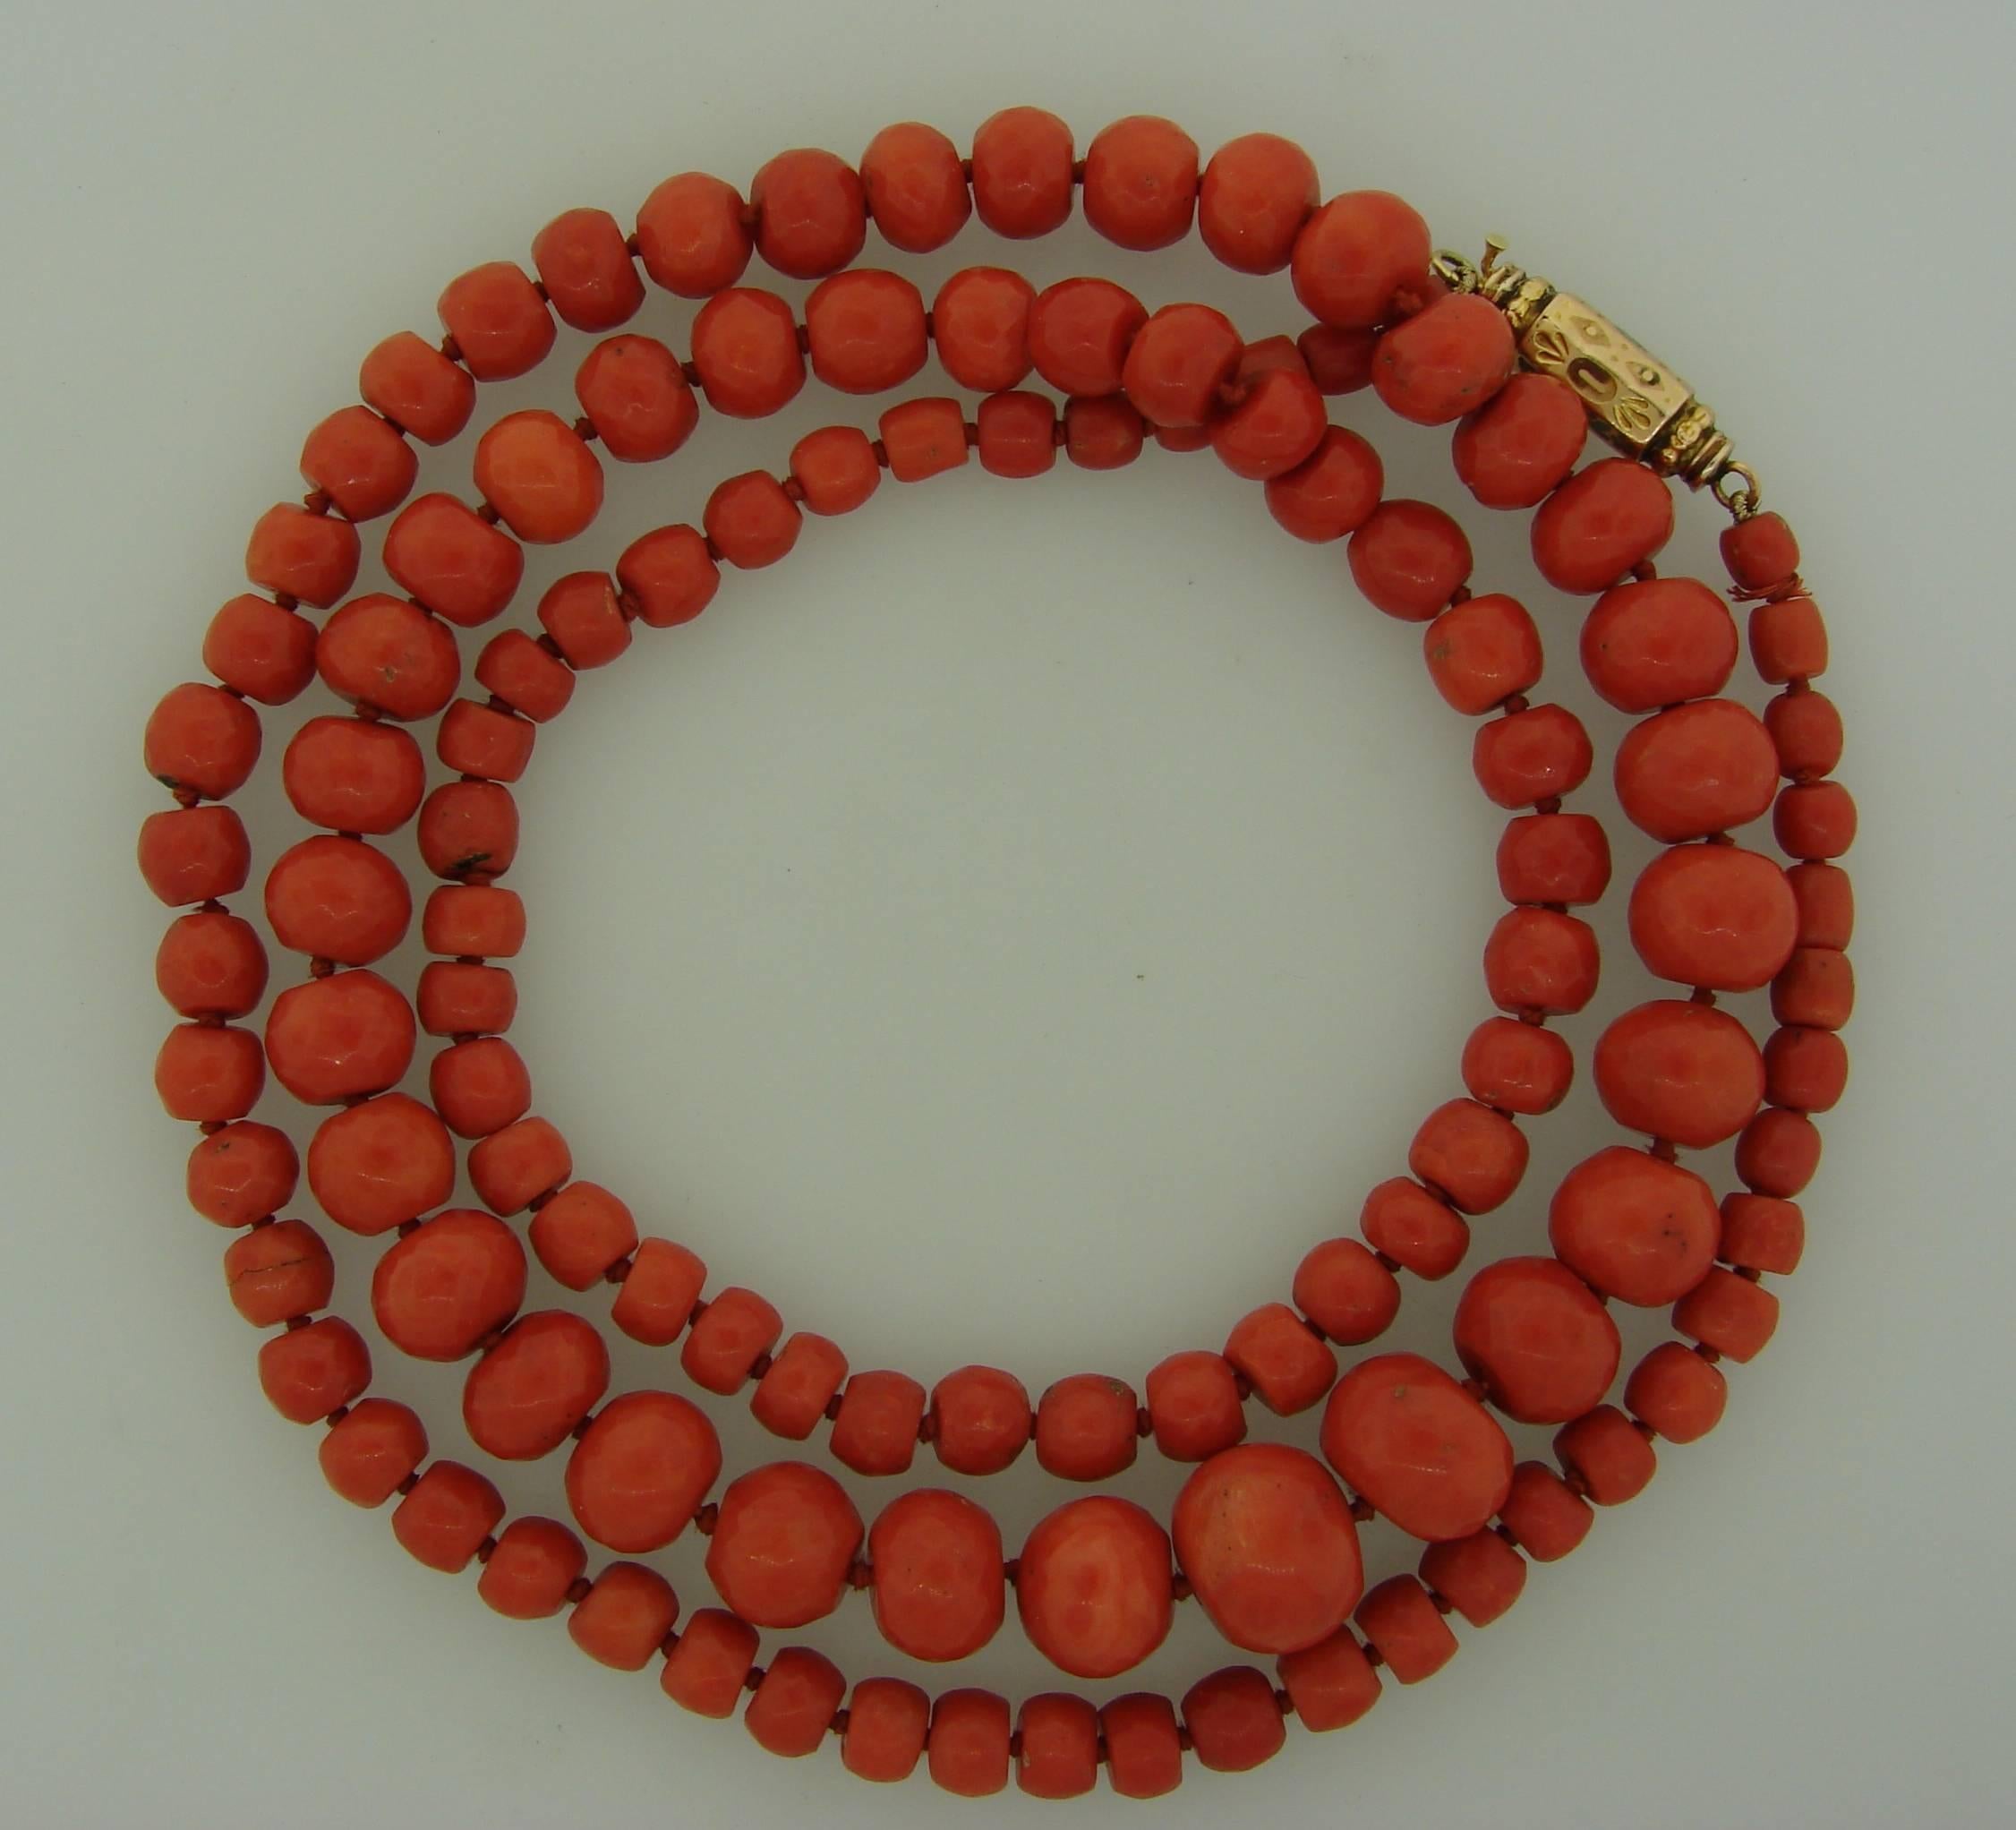 Women's Victorian Coral Bead Strand Necklace with Enameled Yellow Gold Clasp